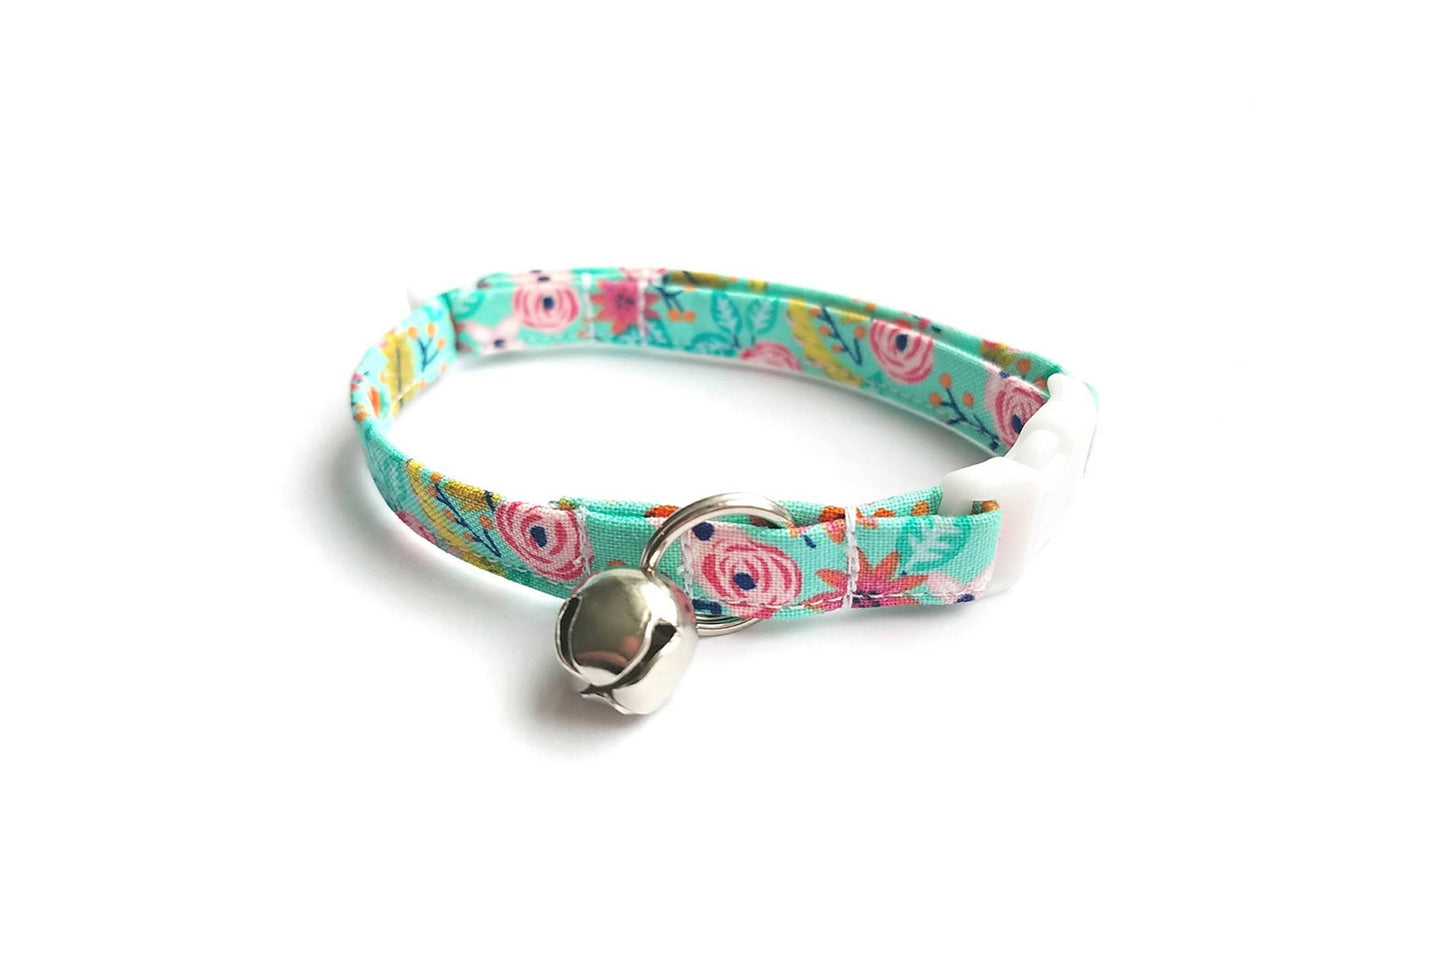 Turquoise Floral Cat Collar - Teal Blue Floral Breakaway Cat Collar - Handmade by Kira's Pet Shop